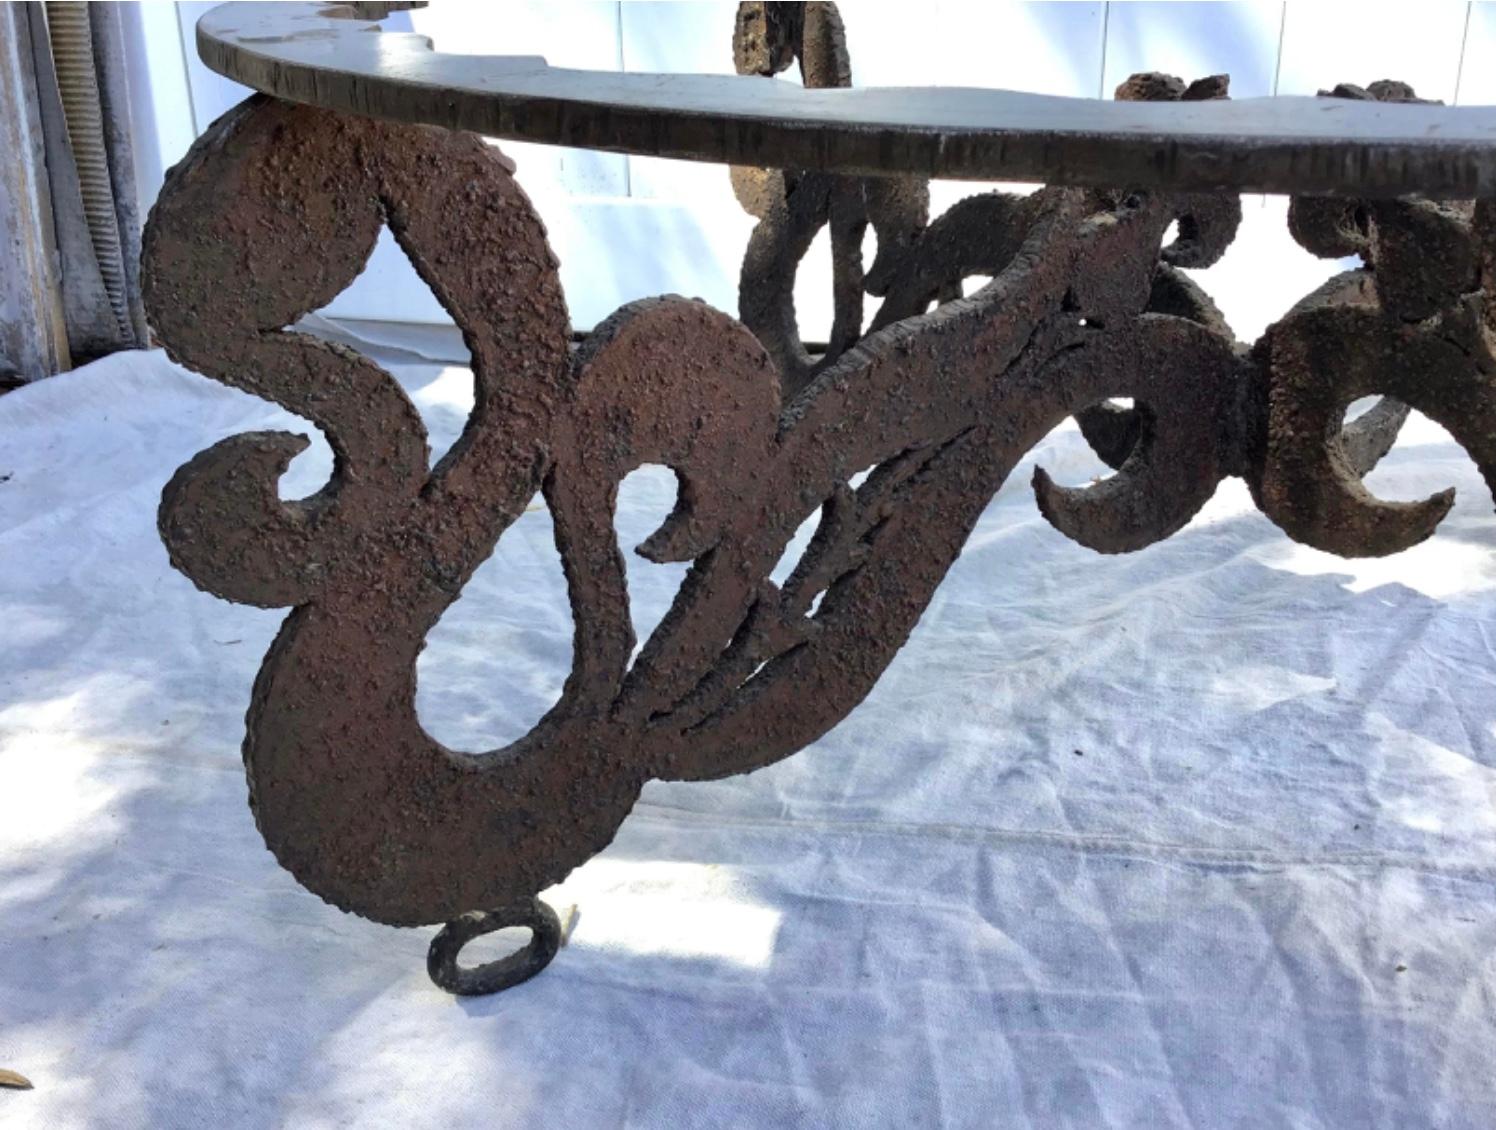 Vintage hand Sculpted Torch cut brutalist metal coffee table. This artistic sculpted iron coffee table base makes for a unique addition to home, art studio or Business. In excellent condition with appropriate wear / patina.